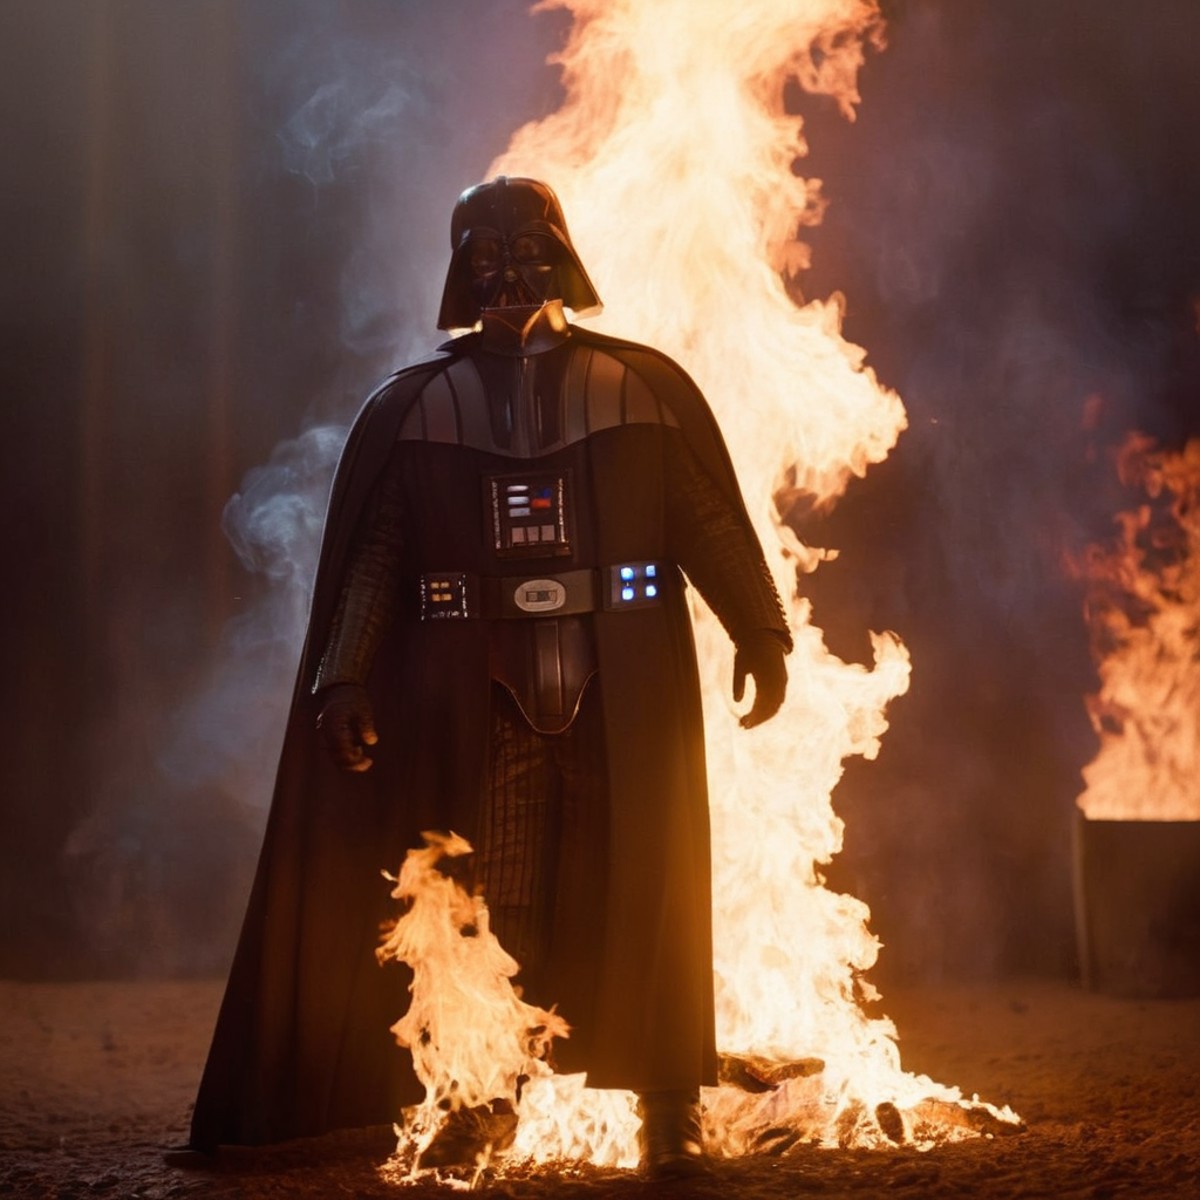 cinematic film still of  <lora:Darth Vader:1.5>
Darth Vader a human cooked meat body is set on fire with ashes and fire br...